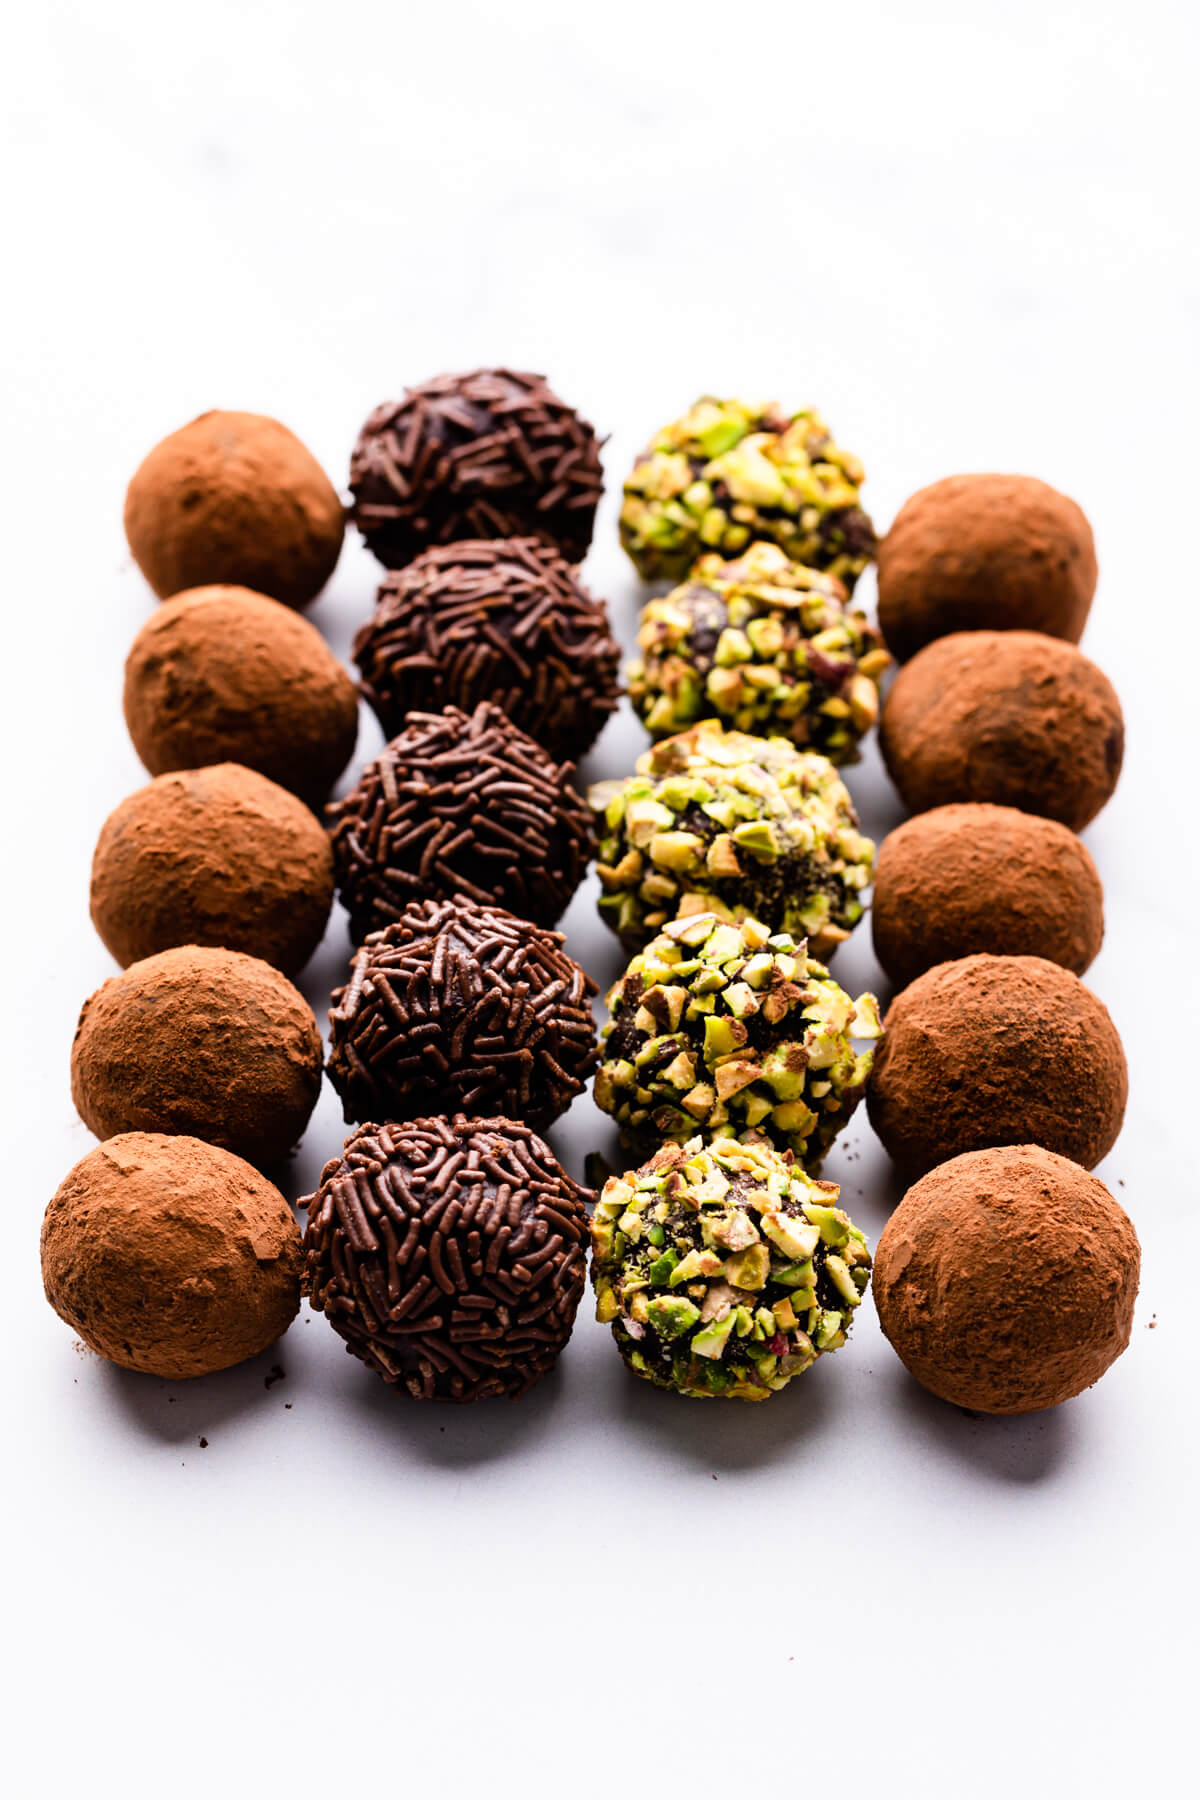 chocolate truffles arranged in rows of five.